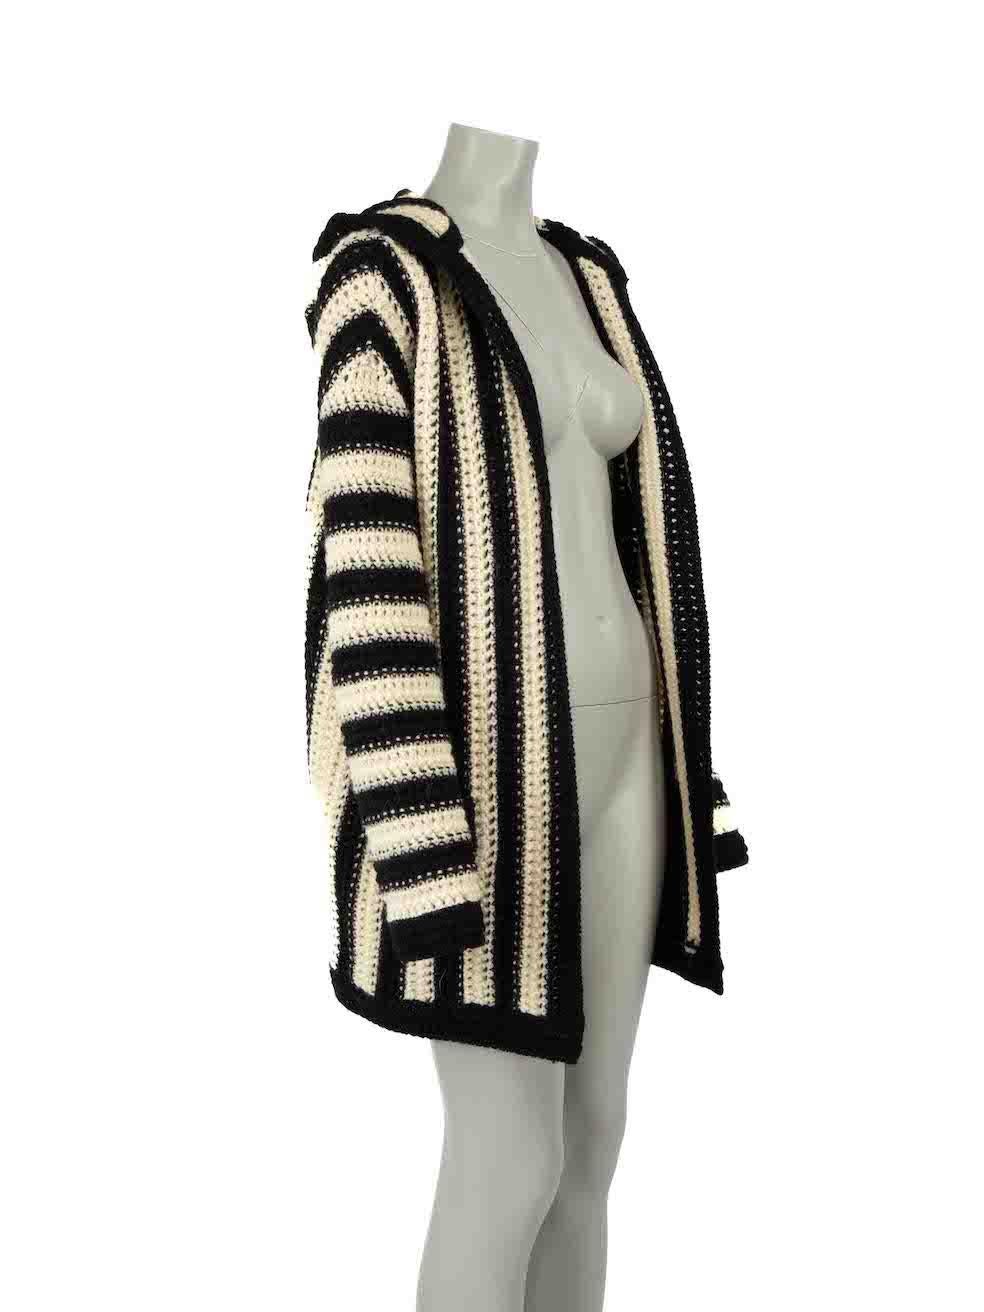 CONDITION is Very good. Hardly any visible wear to cardigan is evident on this used Saint Laurent designer resale item.
 
 Details
 Multicolour
 Wool
 Knit cardigan
 Striped pattern
 Hooded
 Open front
 2x Front pockets
 
 
 Made in Italy
 
